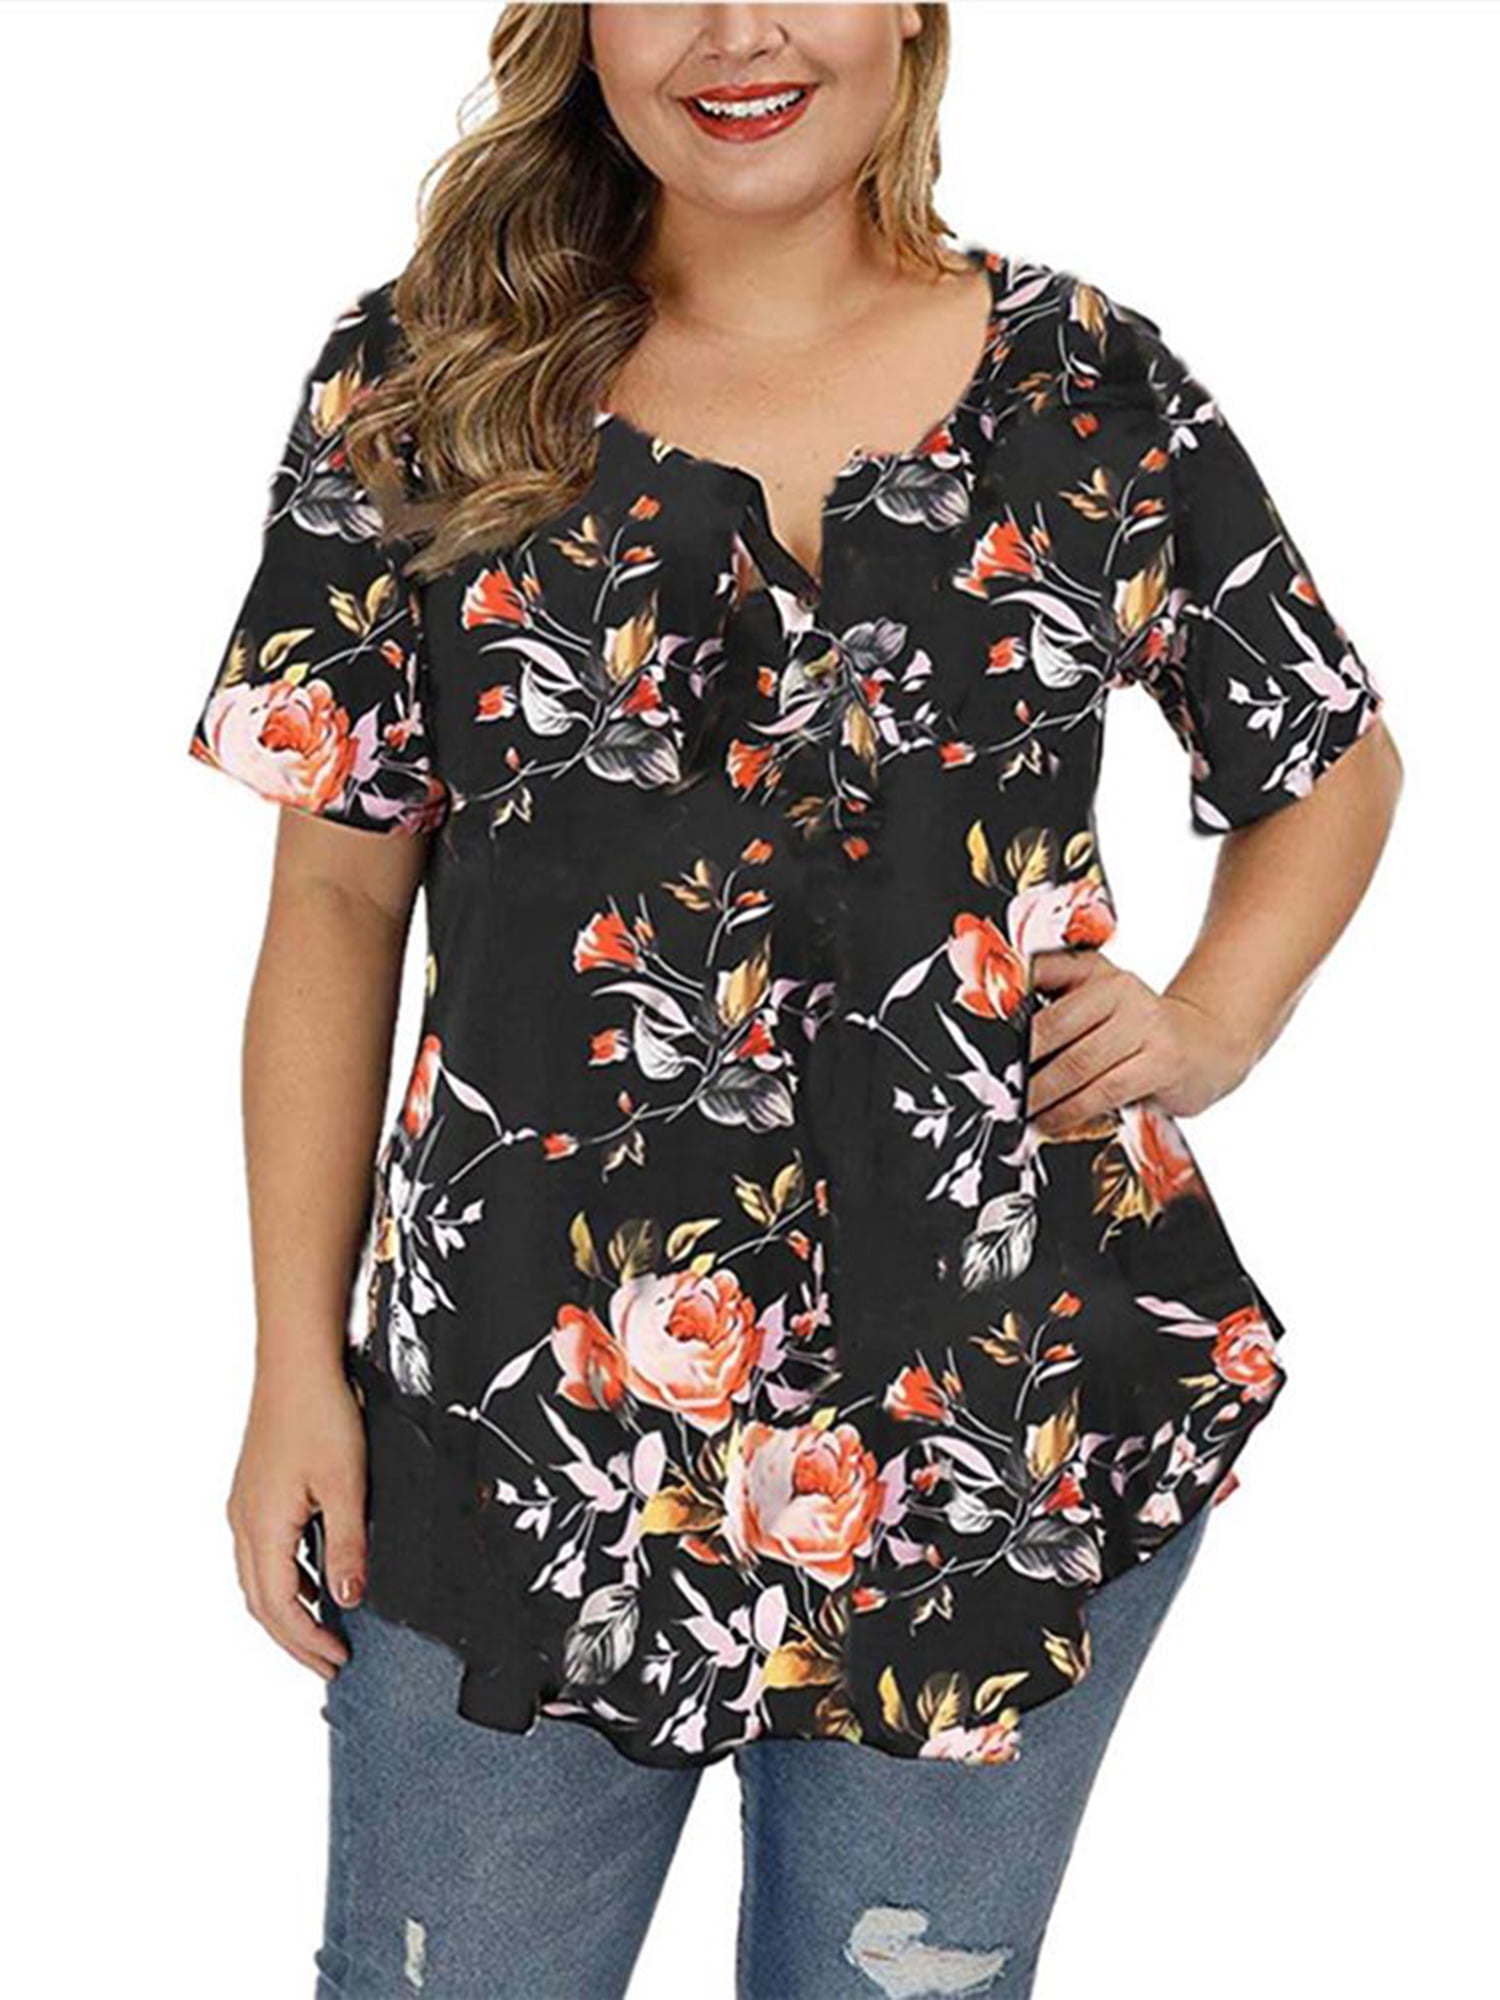 Cyber Monday Deals Women's Plus Size V Neck Floral Tops Short Sleeve Summer Loose T-shirts